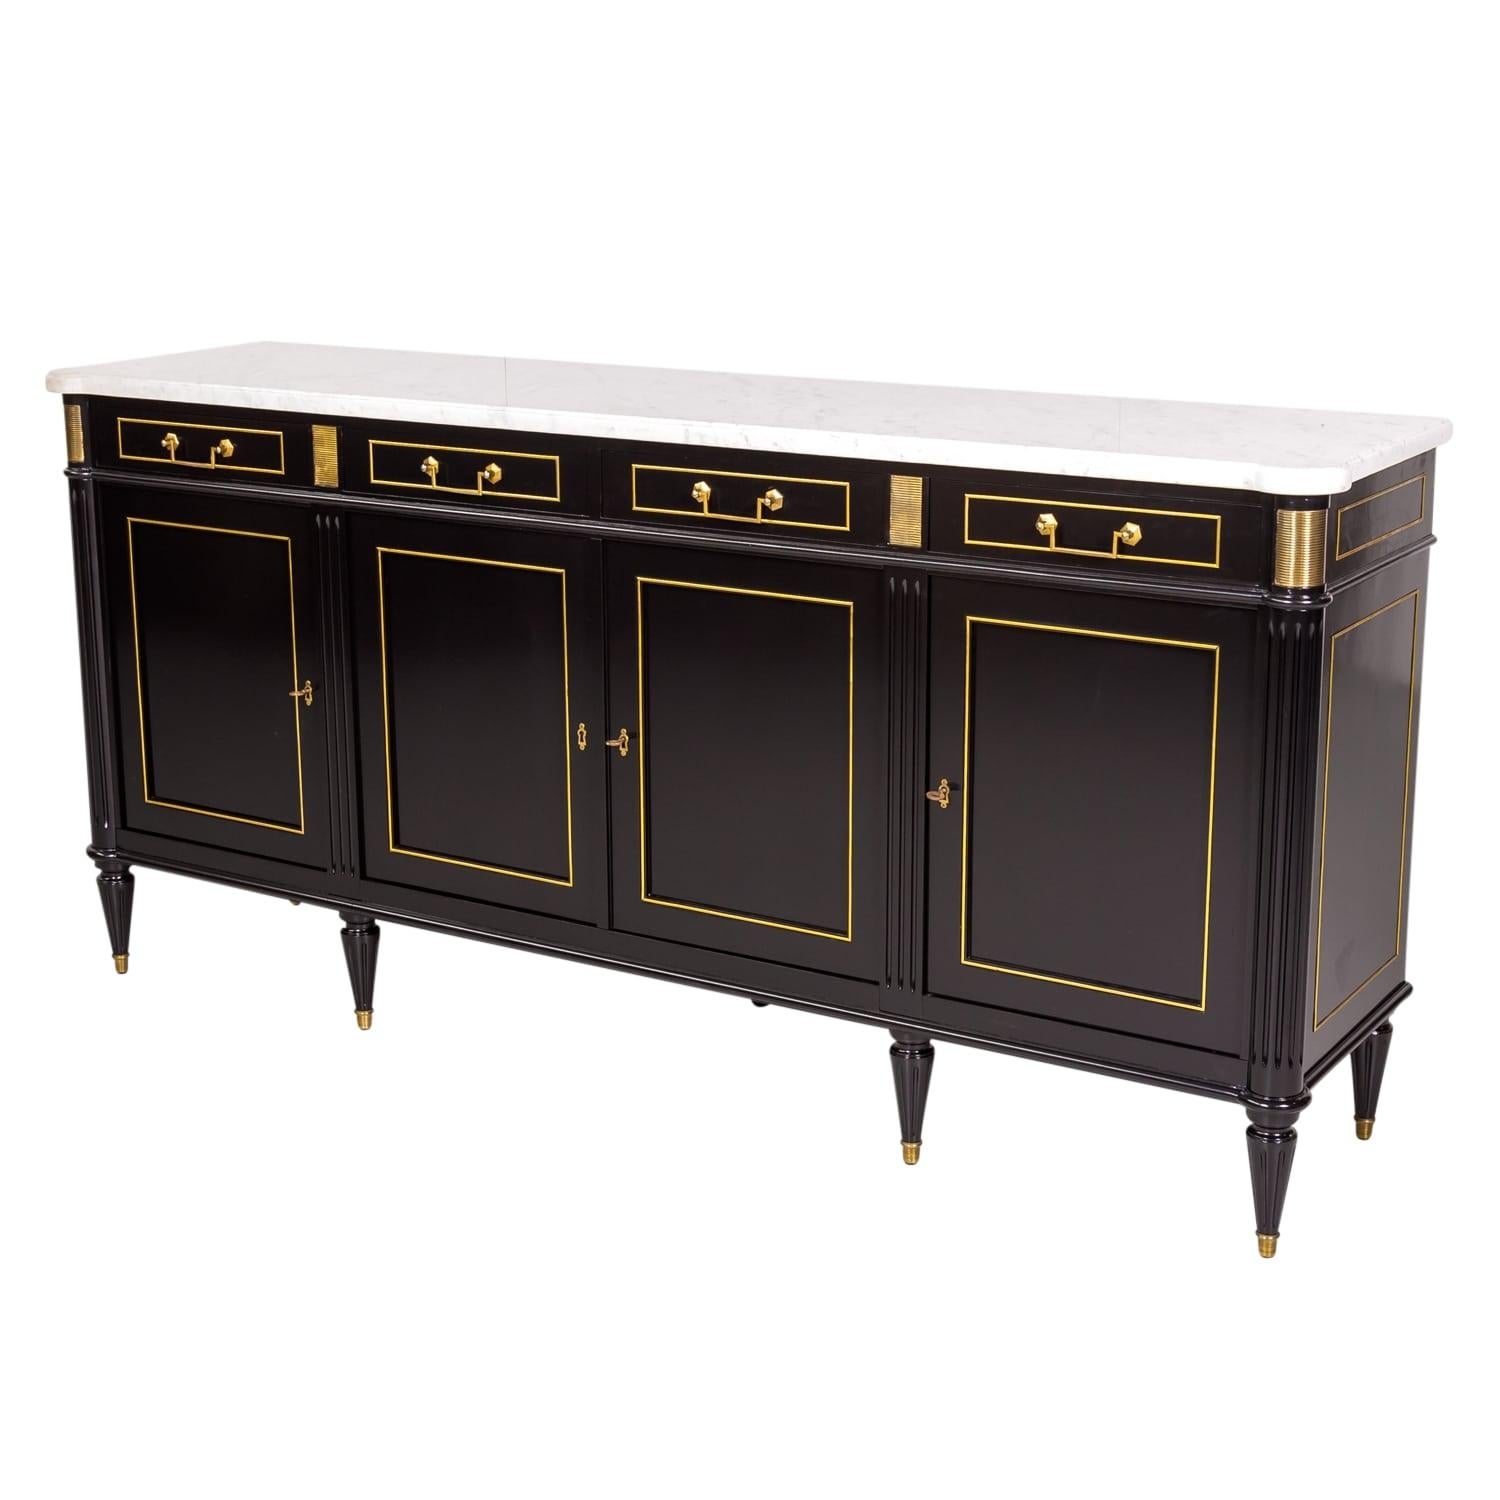 Mid-20th century mahogany Louis XVI style four-drawer, four-door enfilade buffet, circa 1940s. Having an ebonized semi-gloss lacquered finish with original polished Carrara marble top and original brass drop bail handles and trim, this beautiful